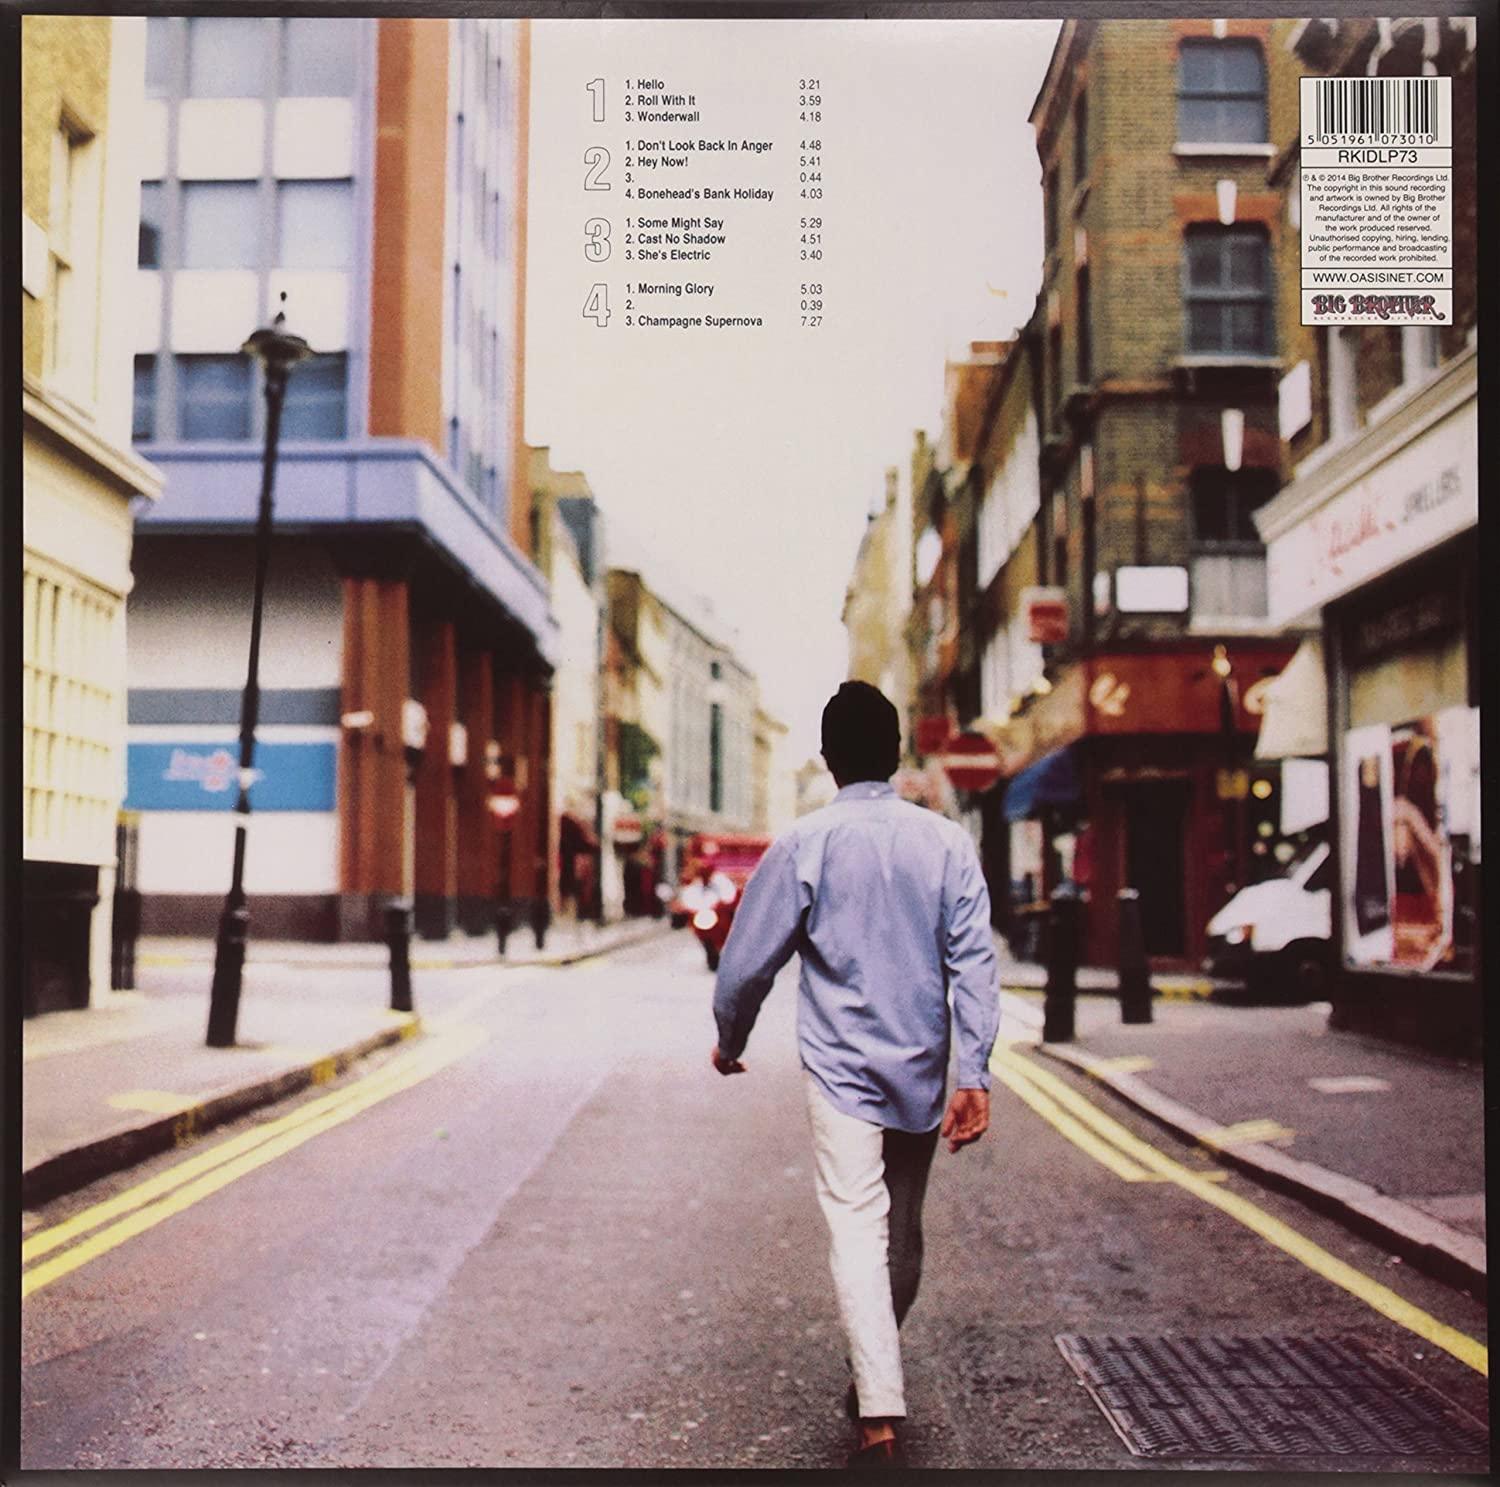 Oasis - (What's The Story) Morning Glory? (Remastered, 180 Gram) (2 LP)